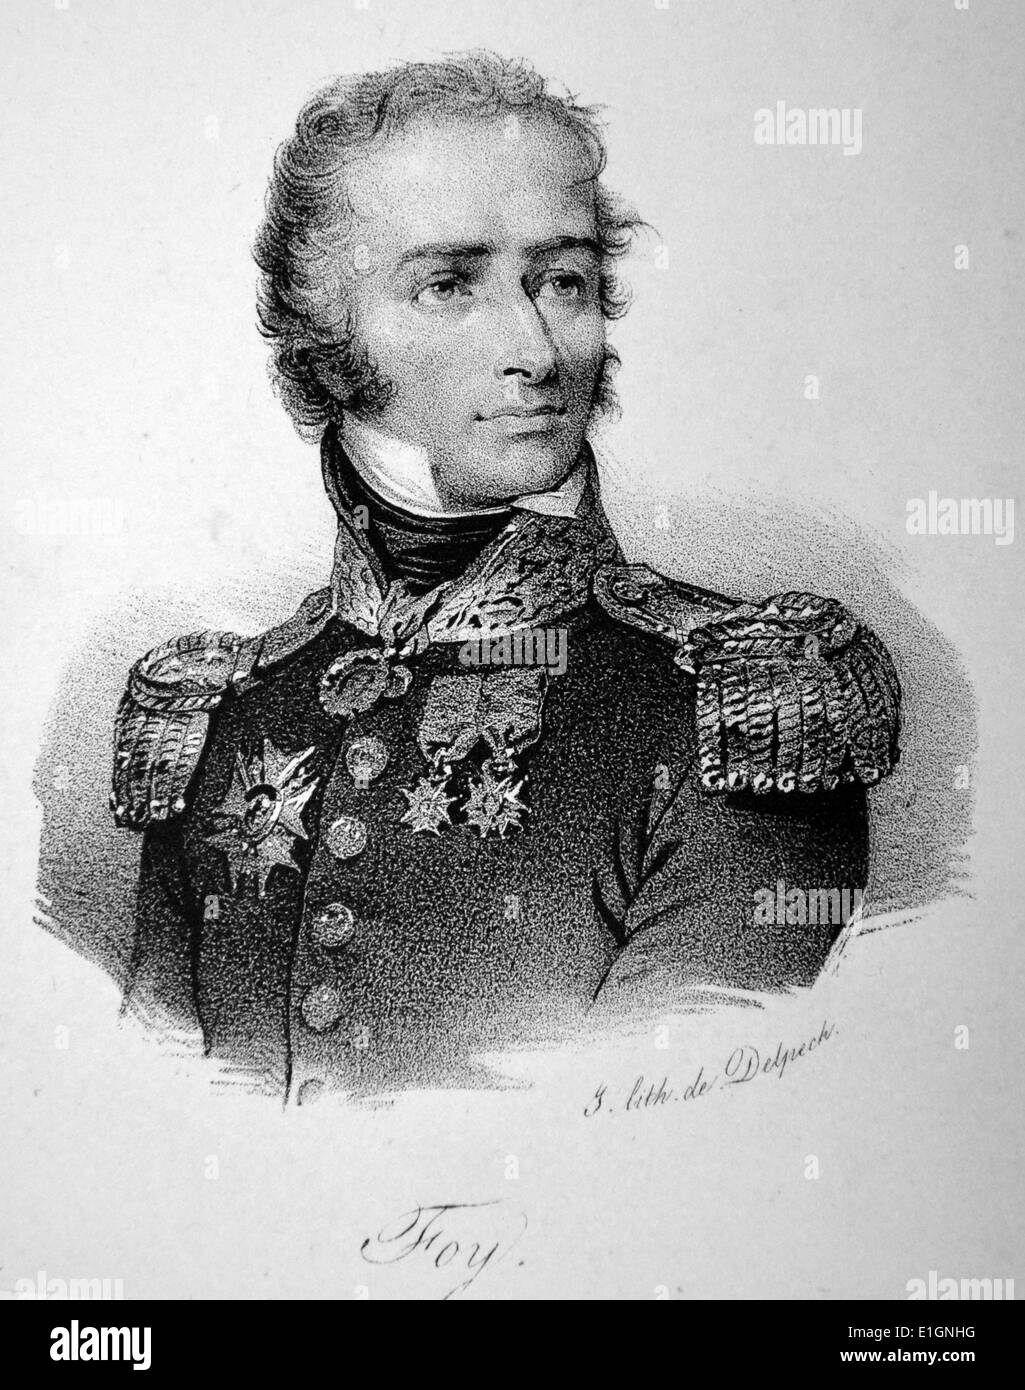 Maximilien Sebastian Foy (1775-1825) French soldier and commander during the Napoleonic Wars. Lithograph, Paris, c1840. Stock Photo